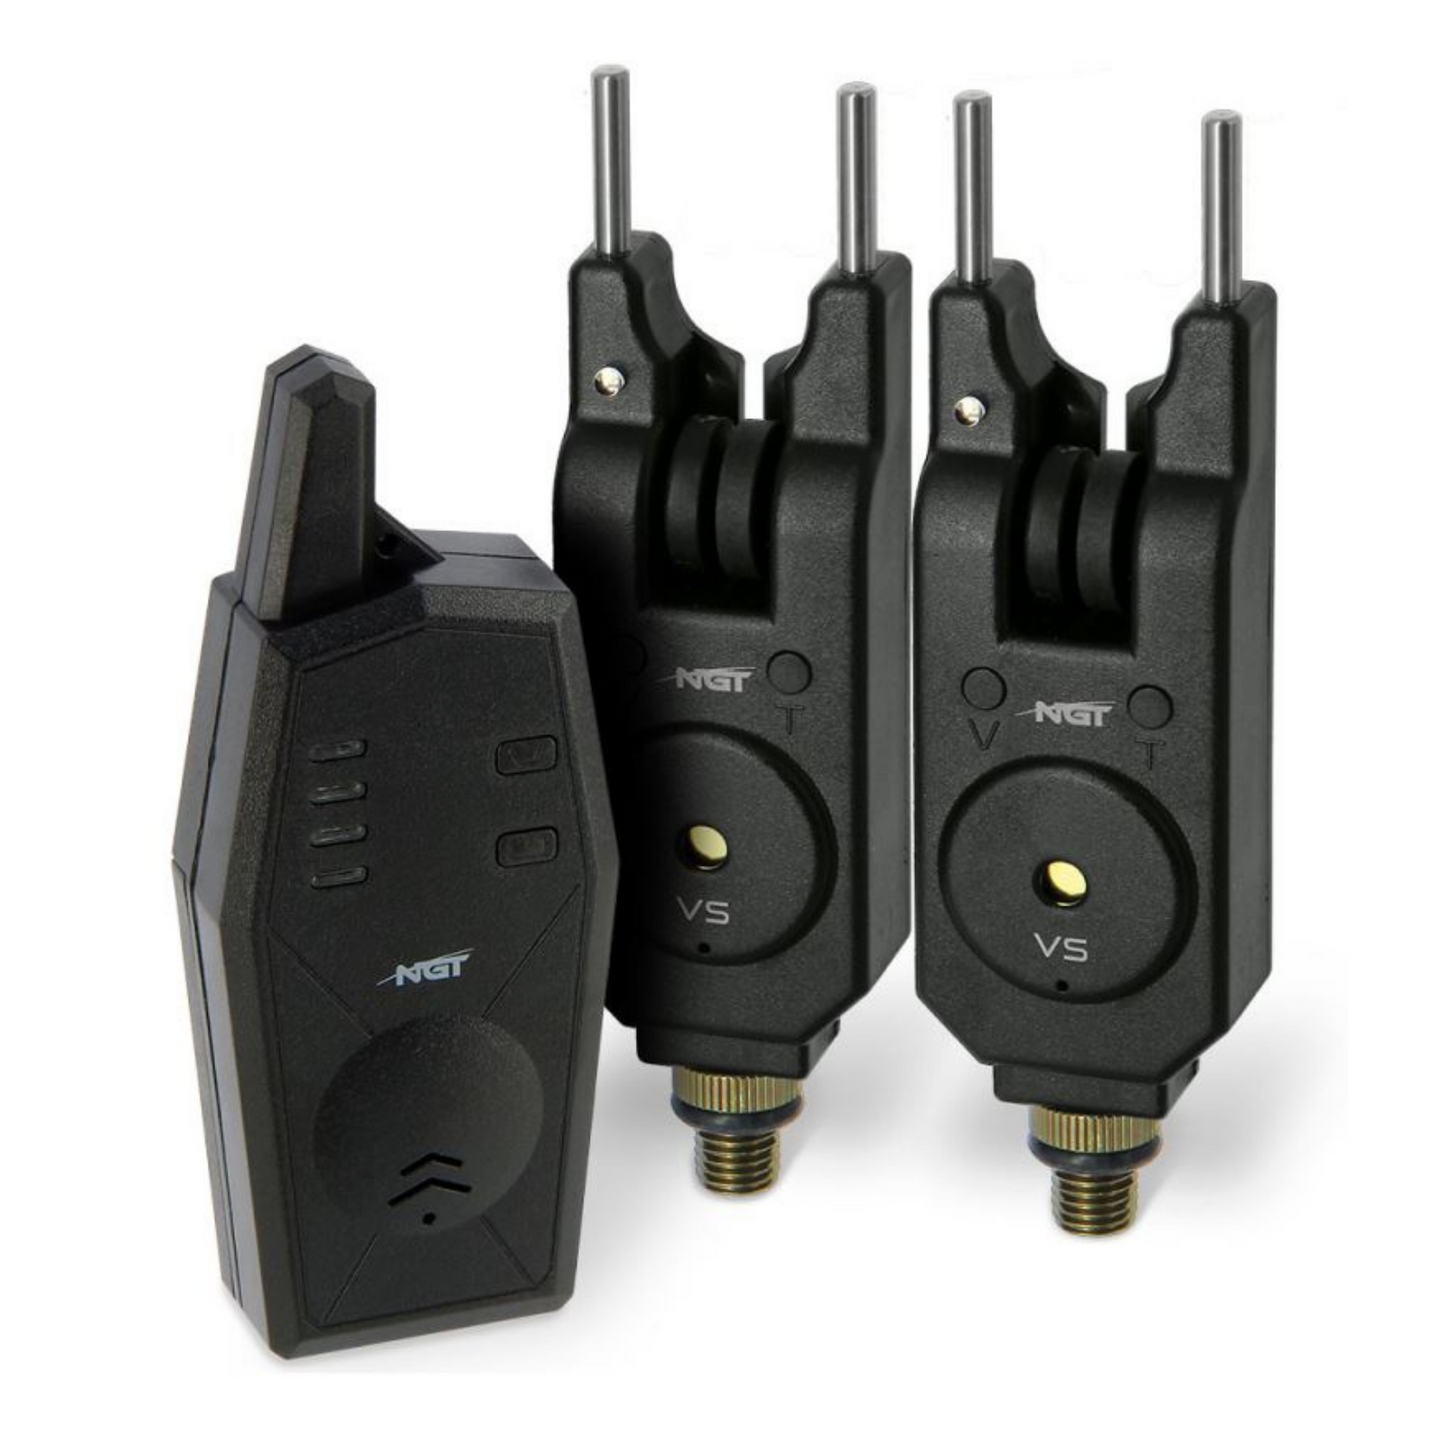 NGT Wireless Twin VS Bite Alarms Adjustable Tone & Volume With Receiver Set New In Stock.